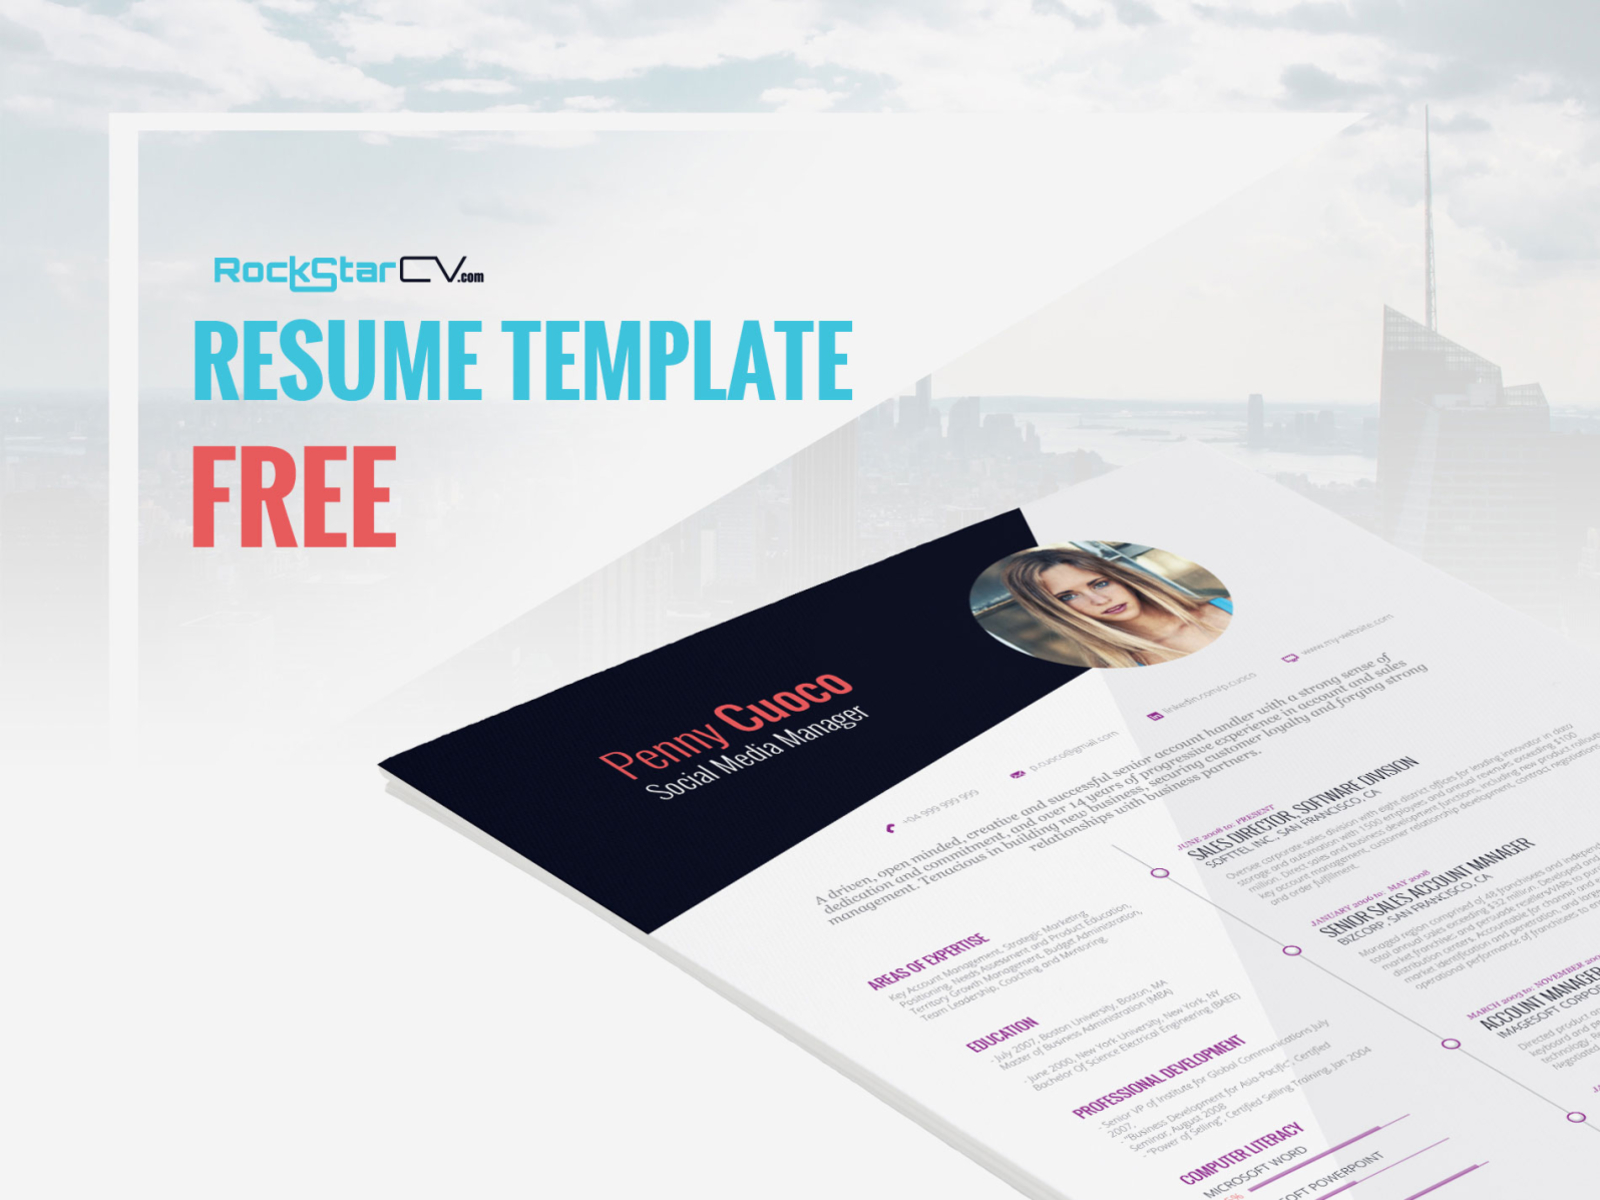 Resume Template Free For Mac from cdn.dribbble.com